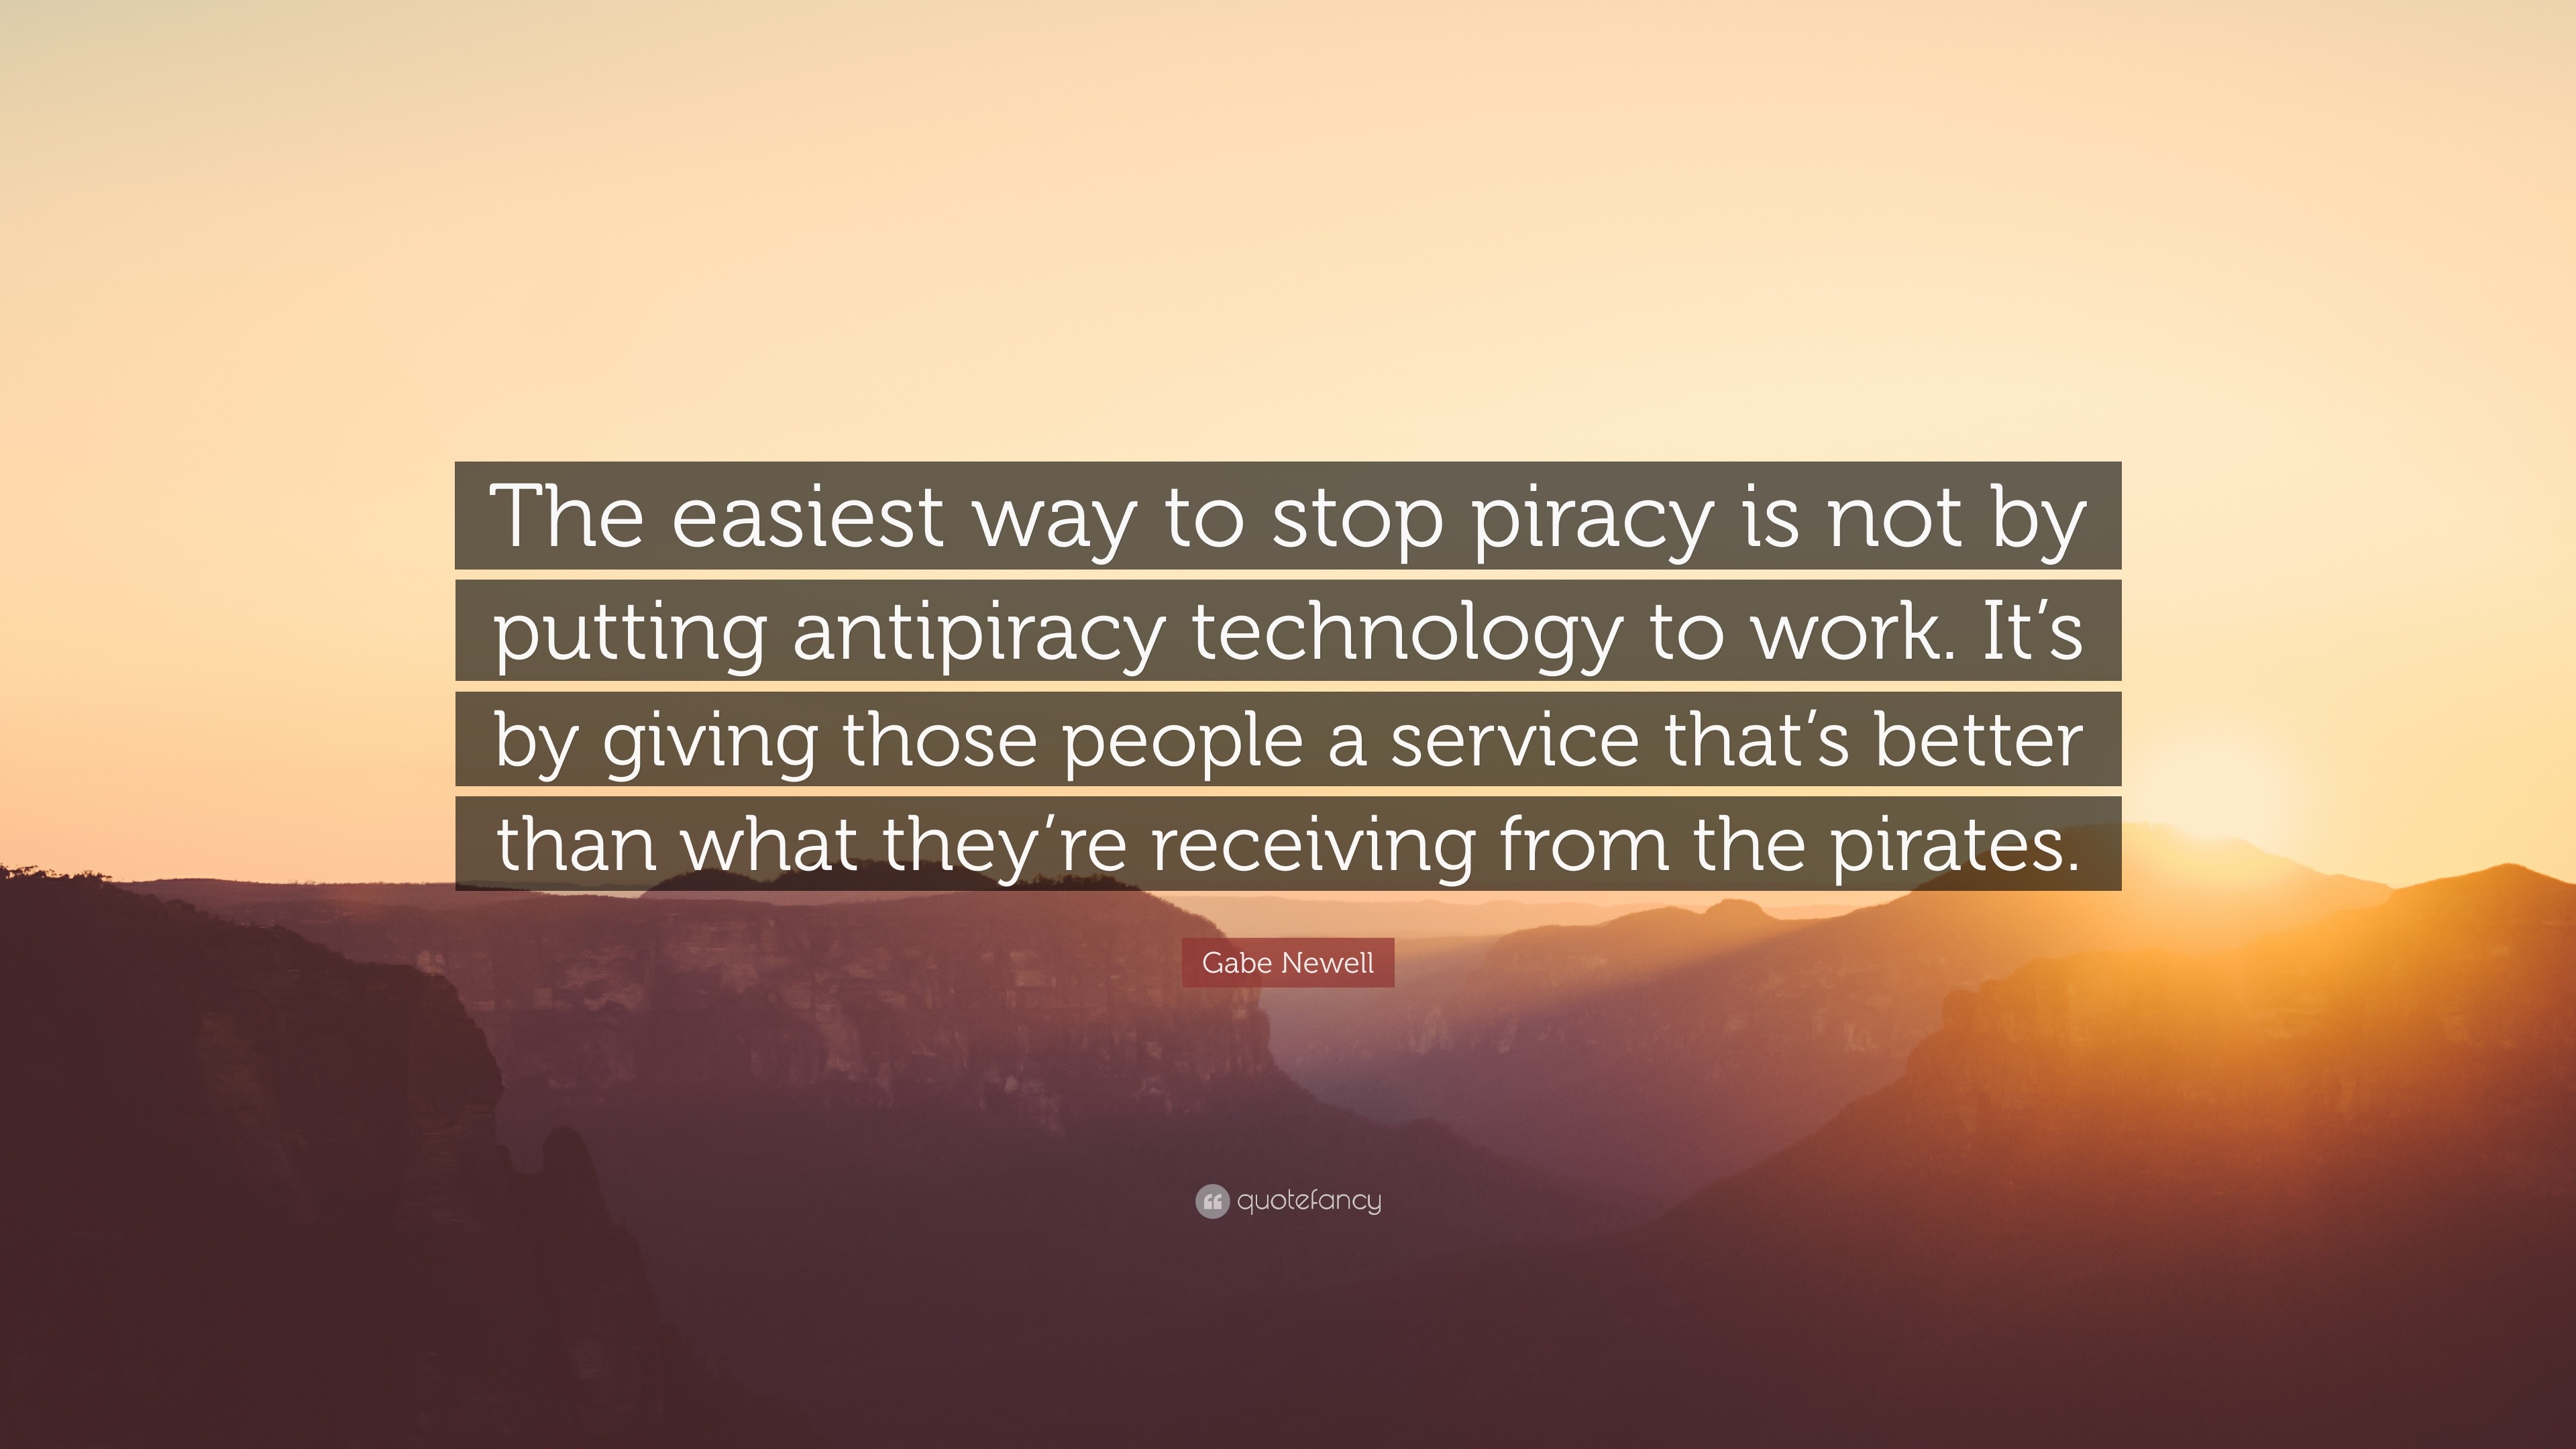 Gabe Newell Quote: “The easiest way to stop piracy is not by putting